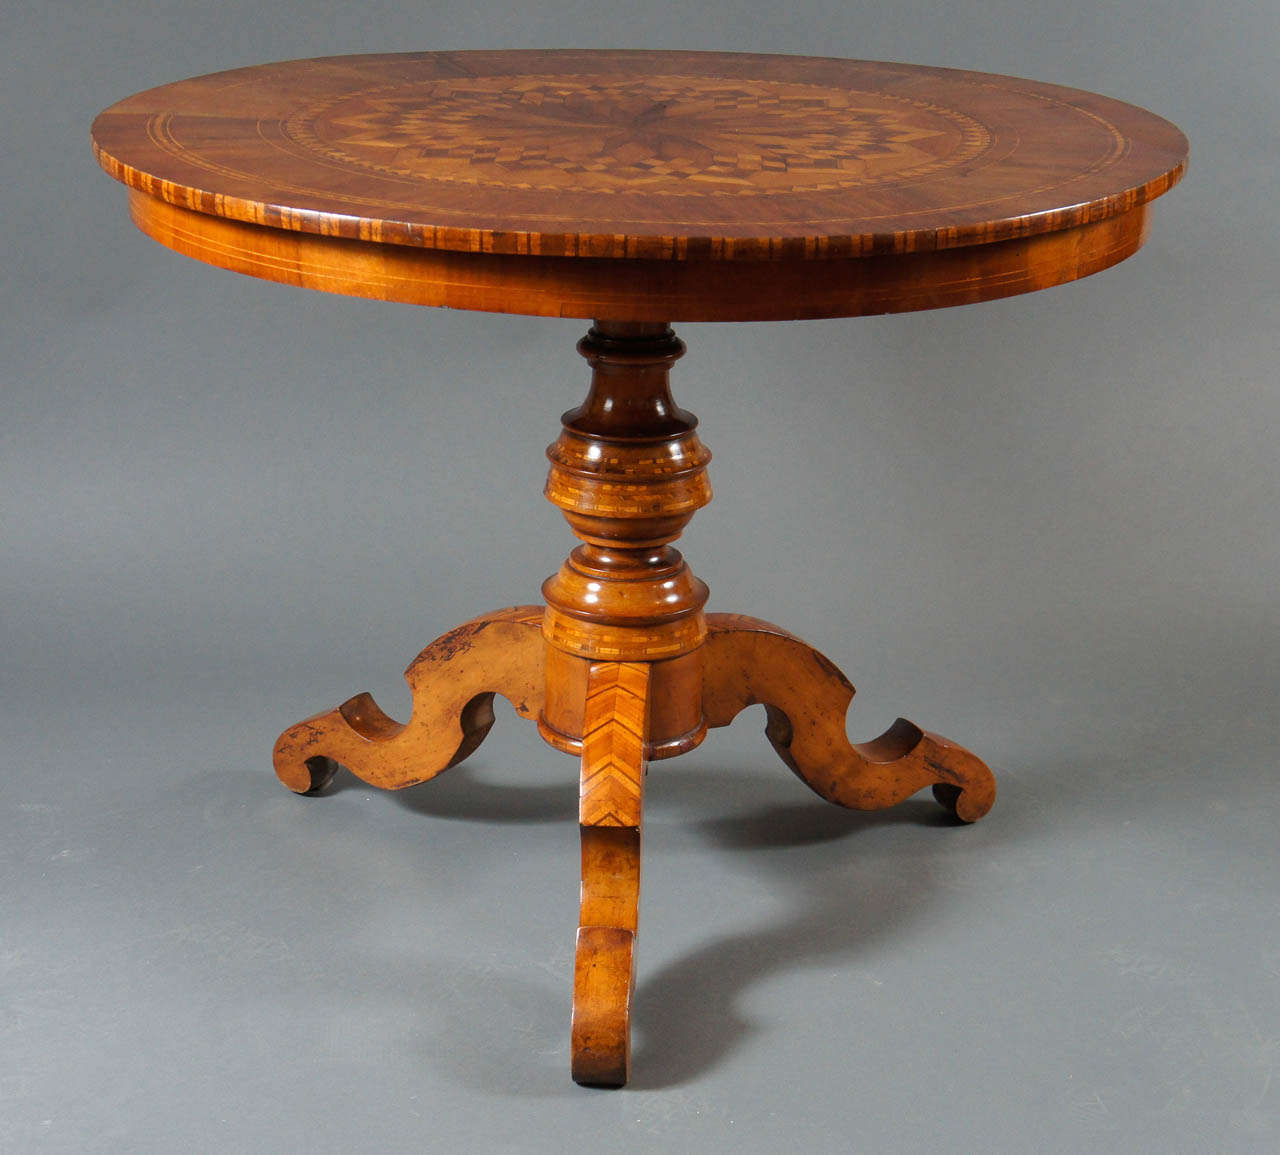 Single centre table with marquetry.